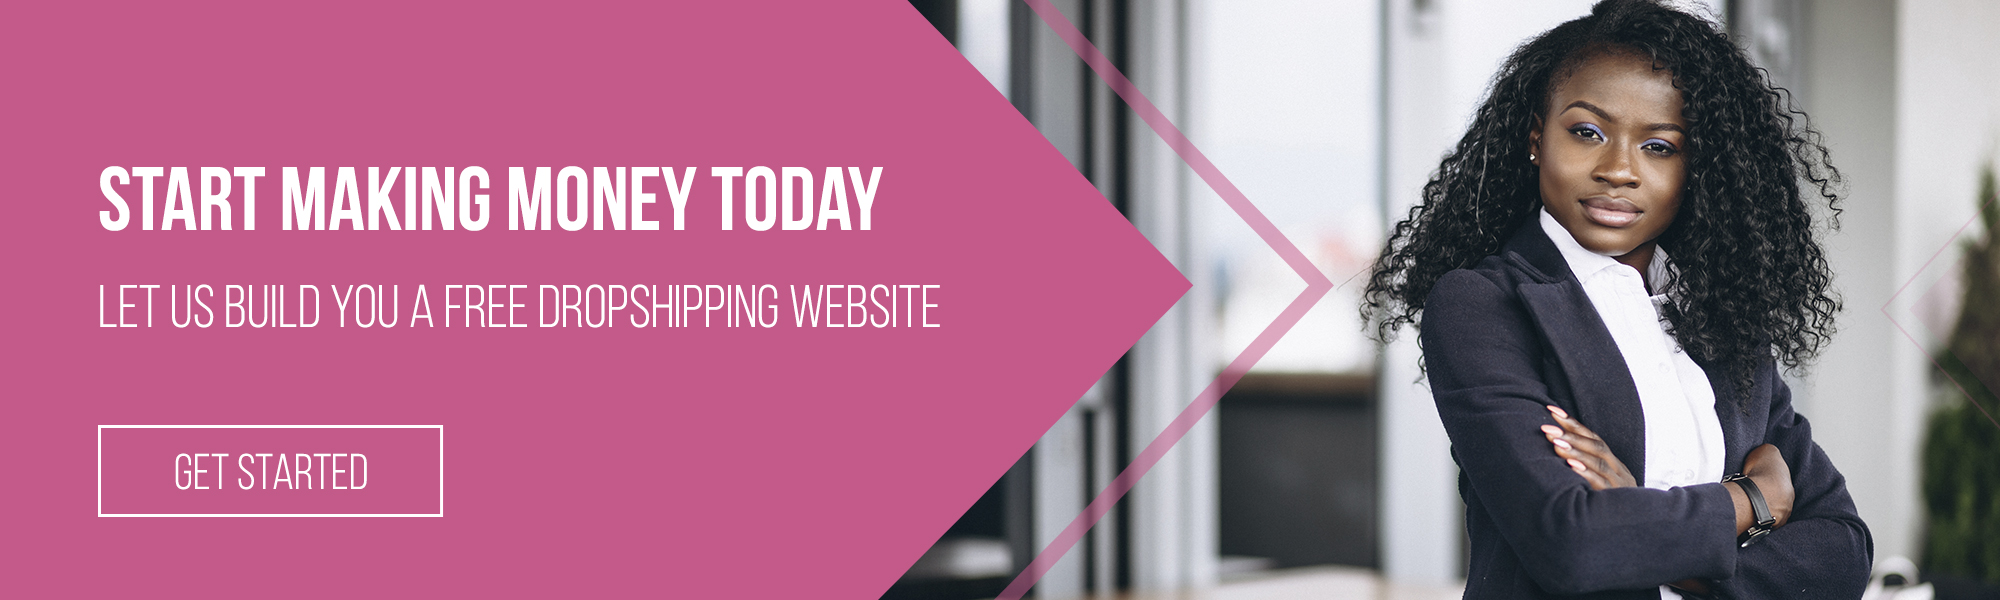 Start Your Dropshipping Business